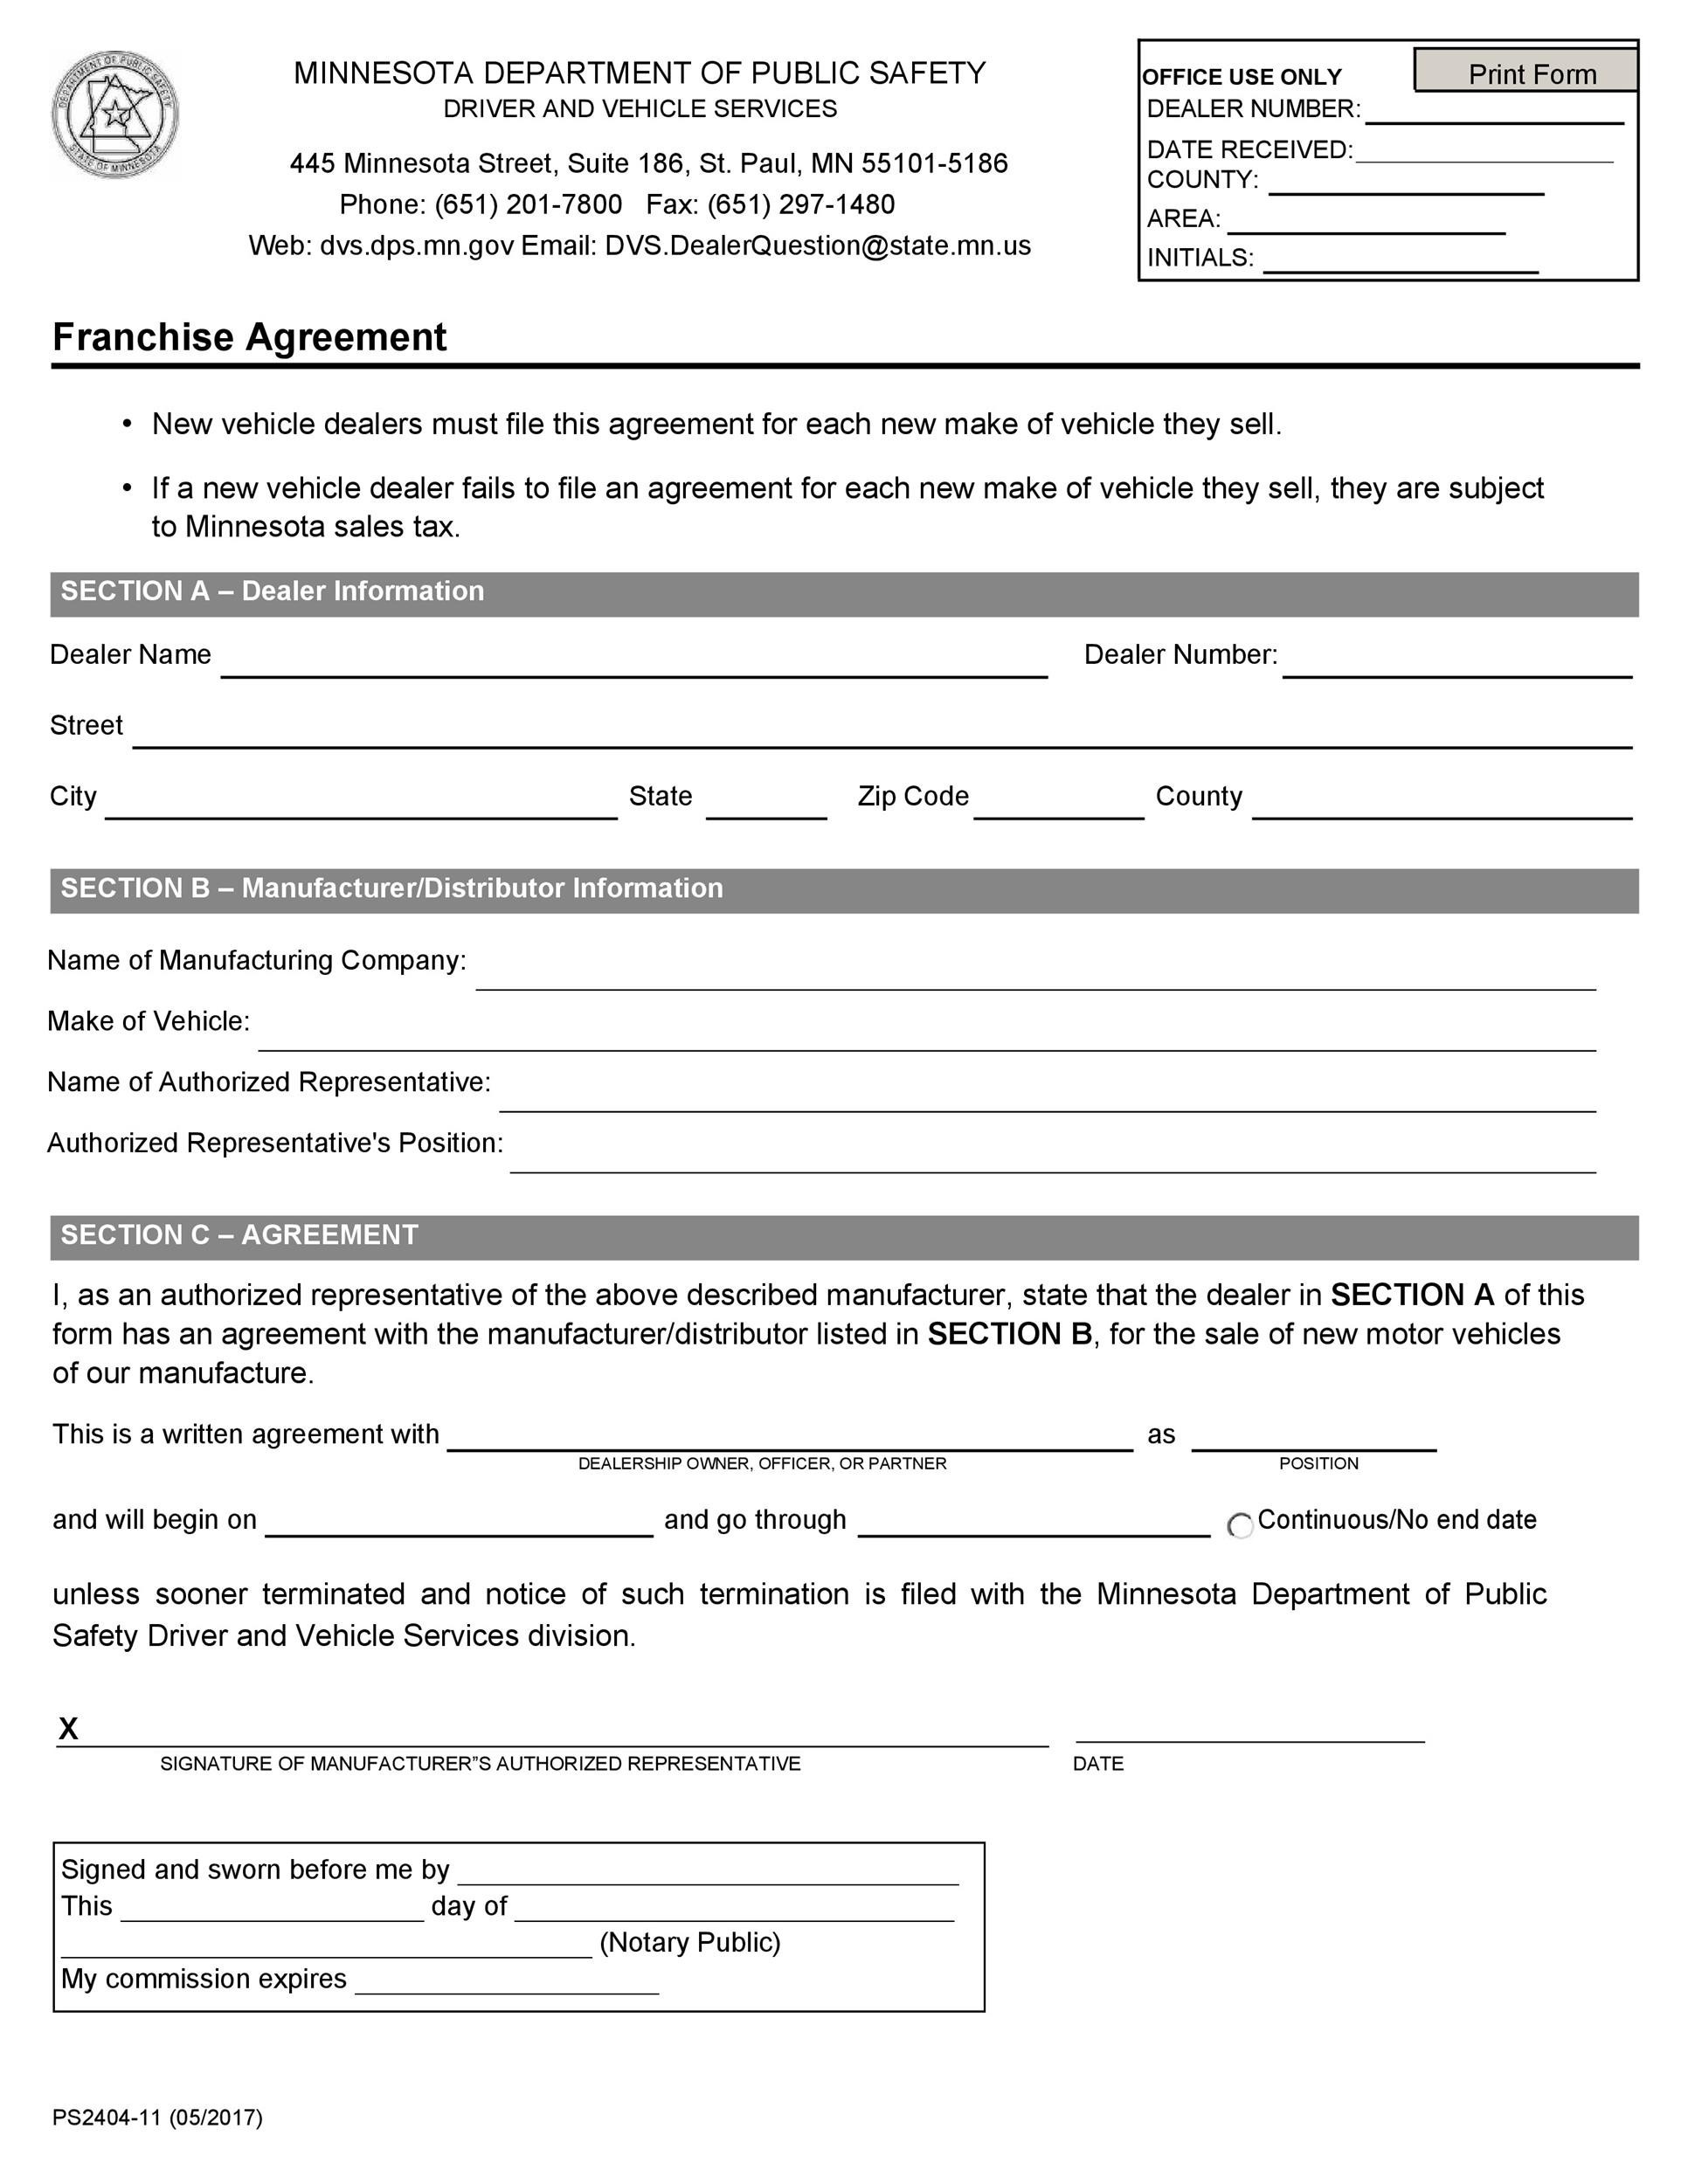  Franchise agreement template free download